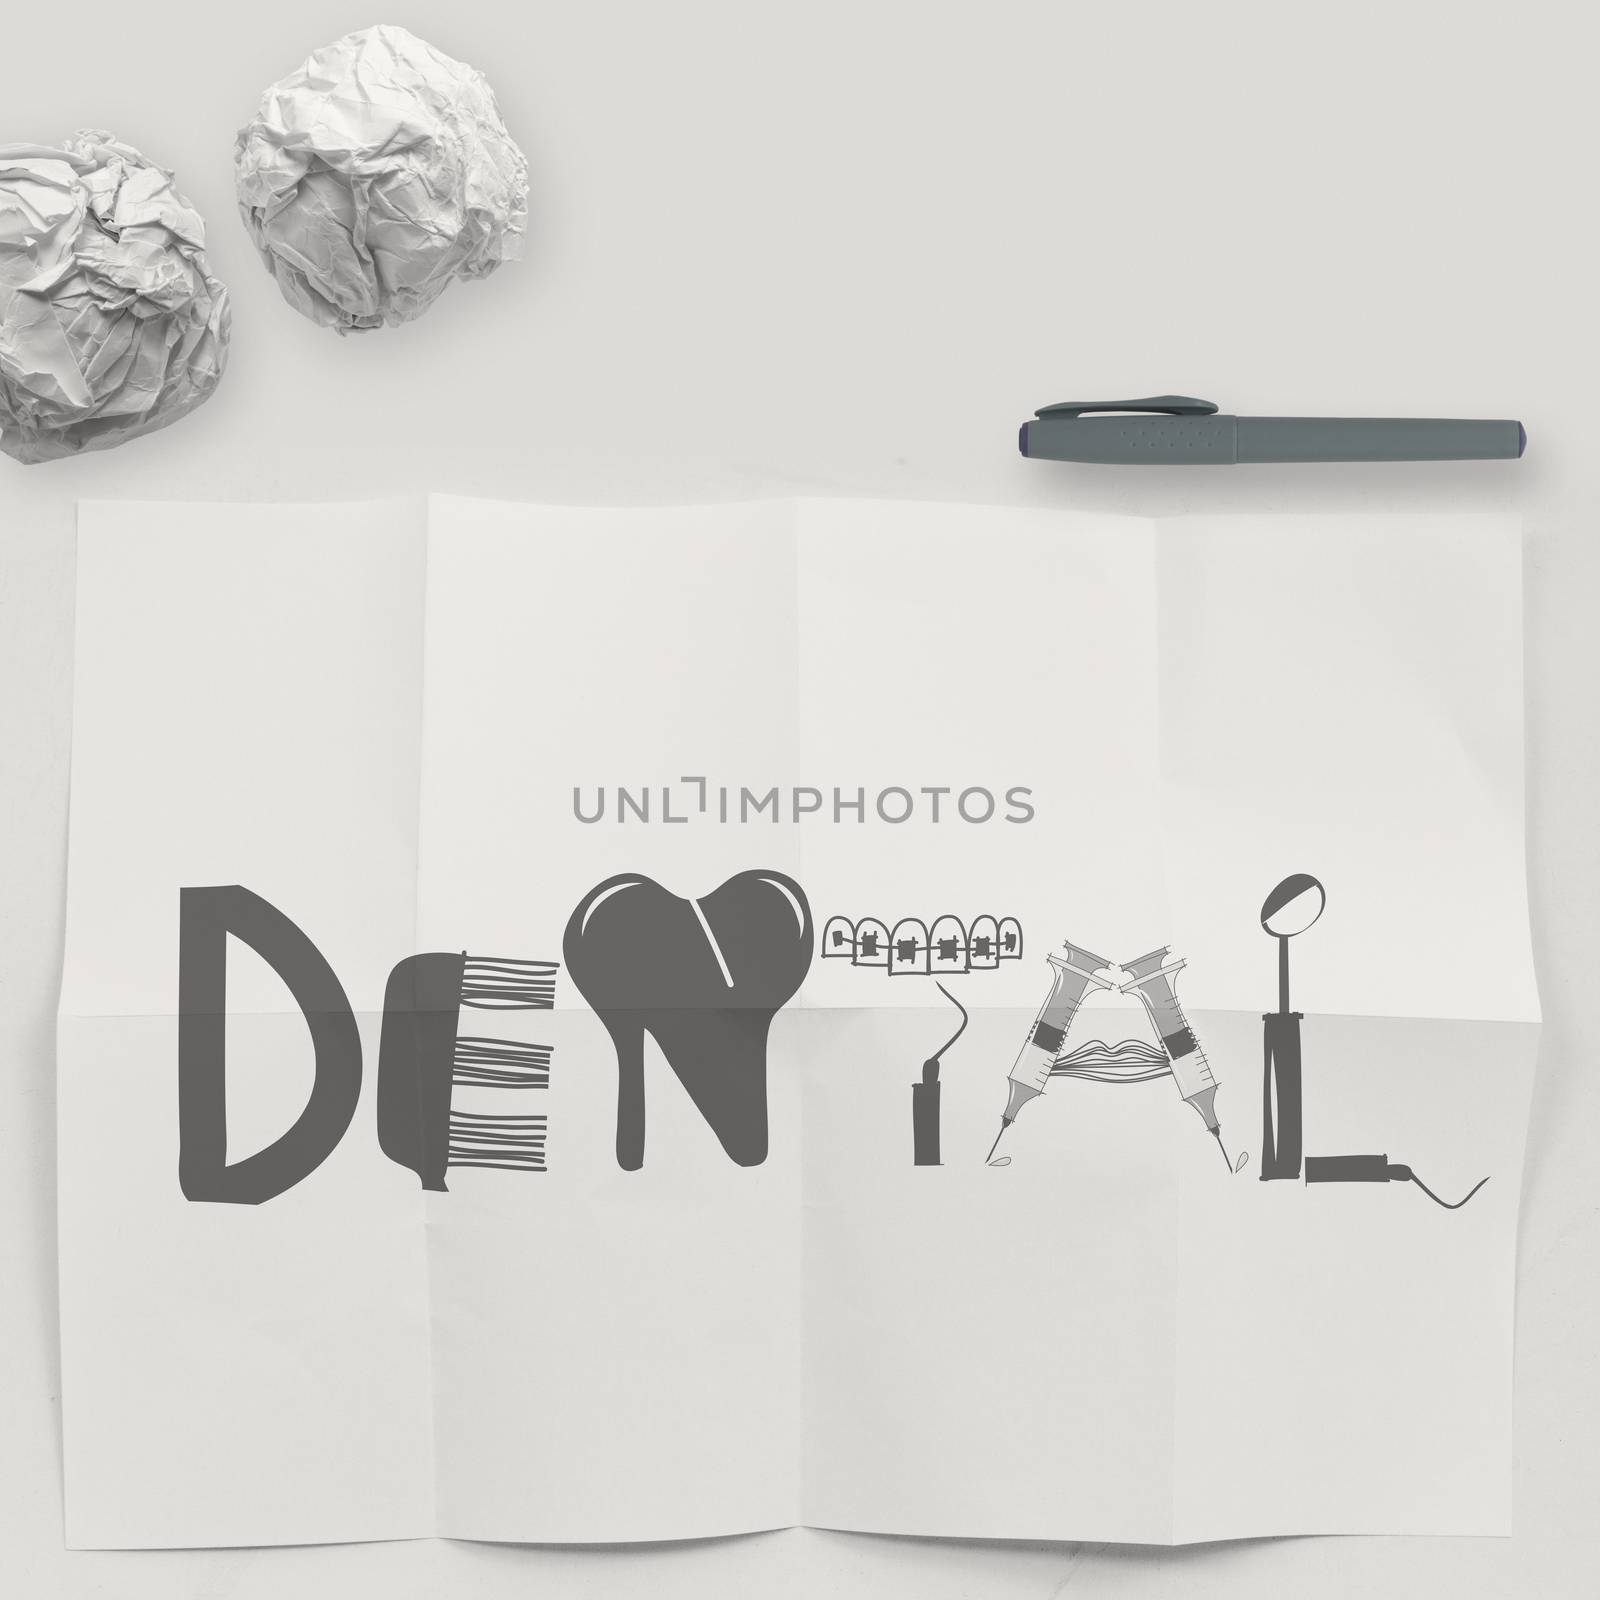 design word DENTAL on white crumpled paper and texture background as concept